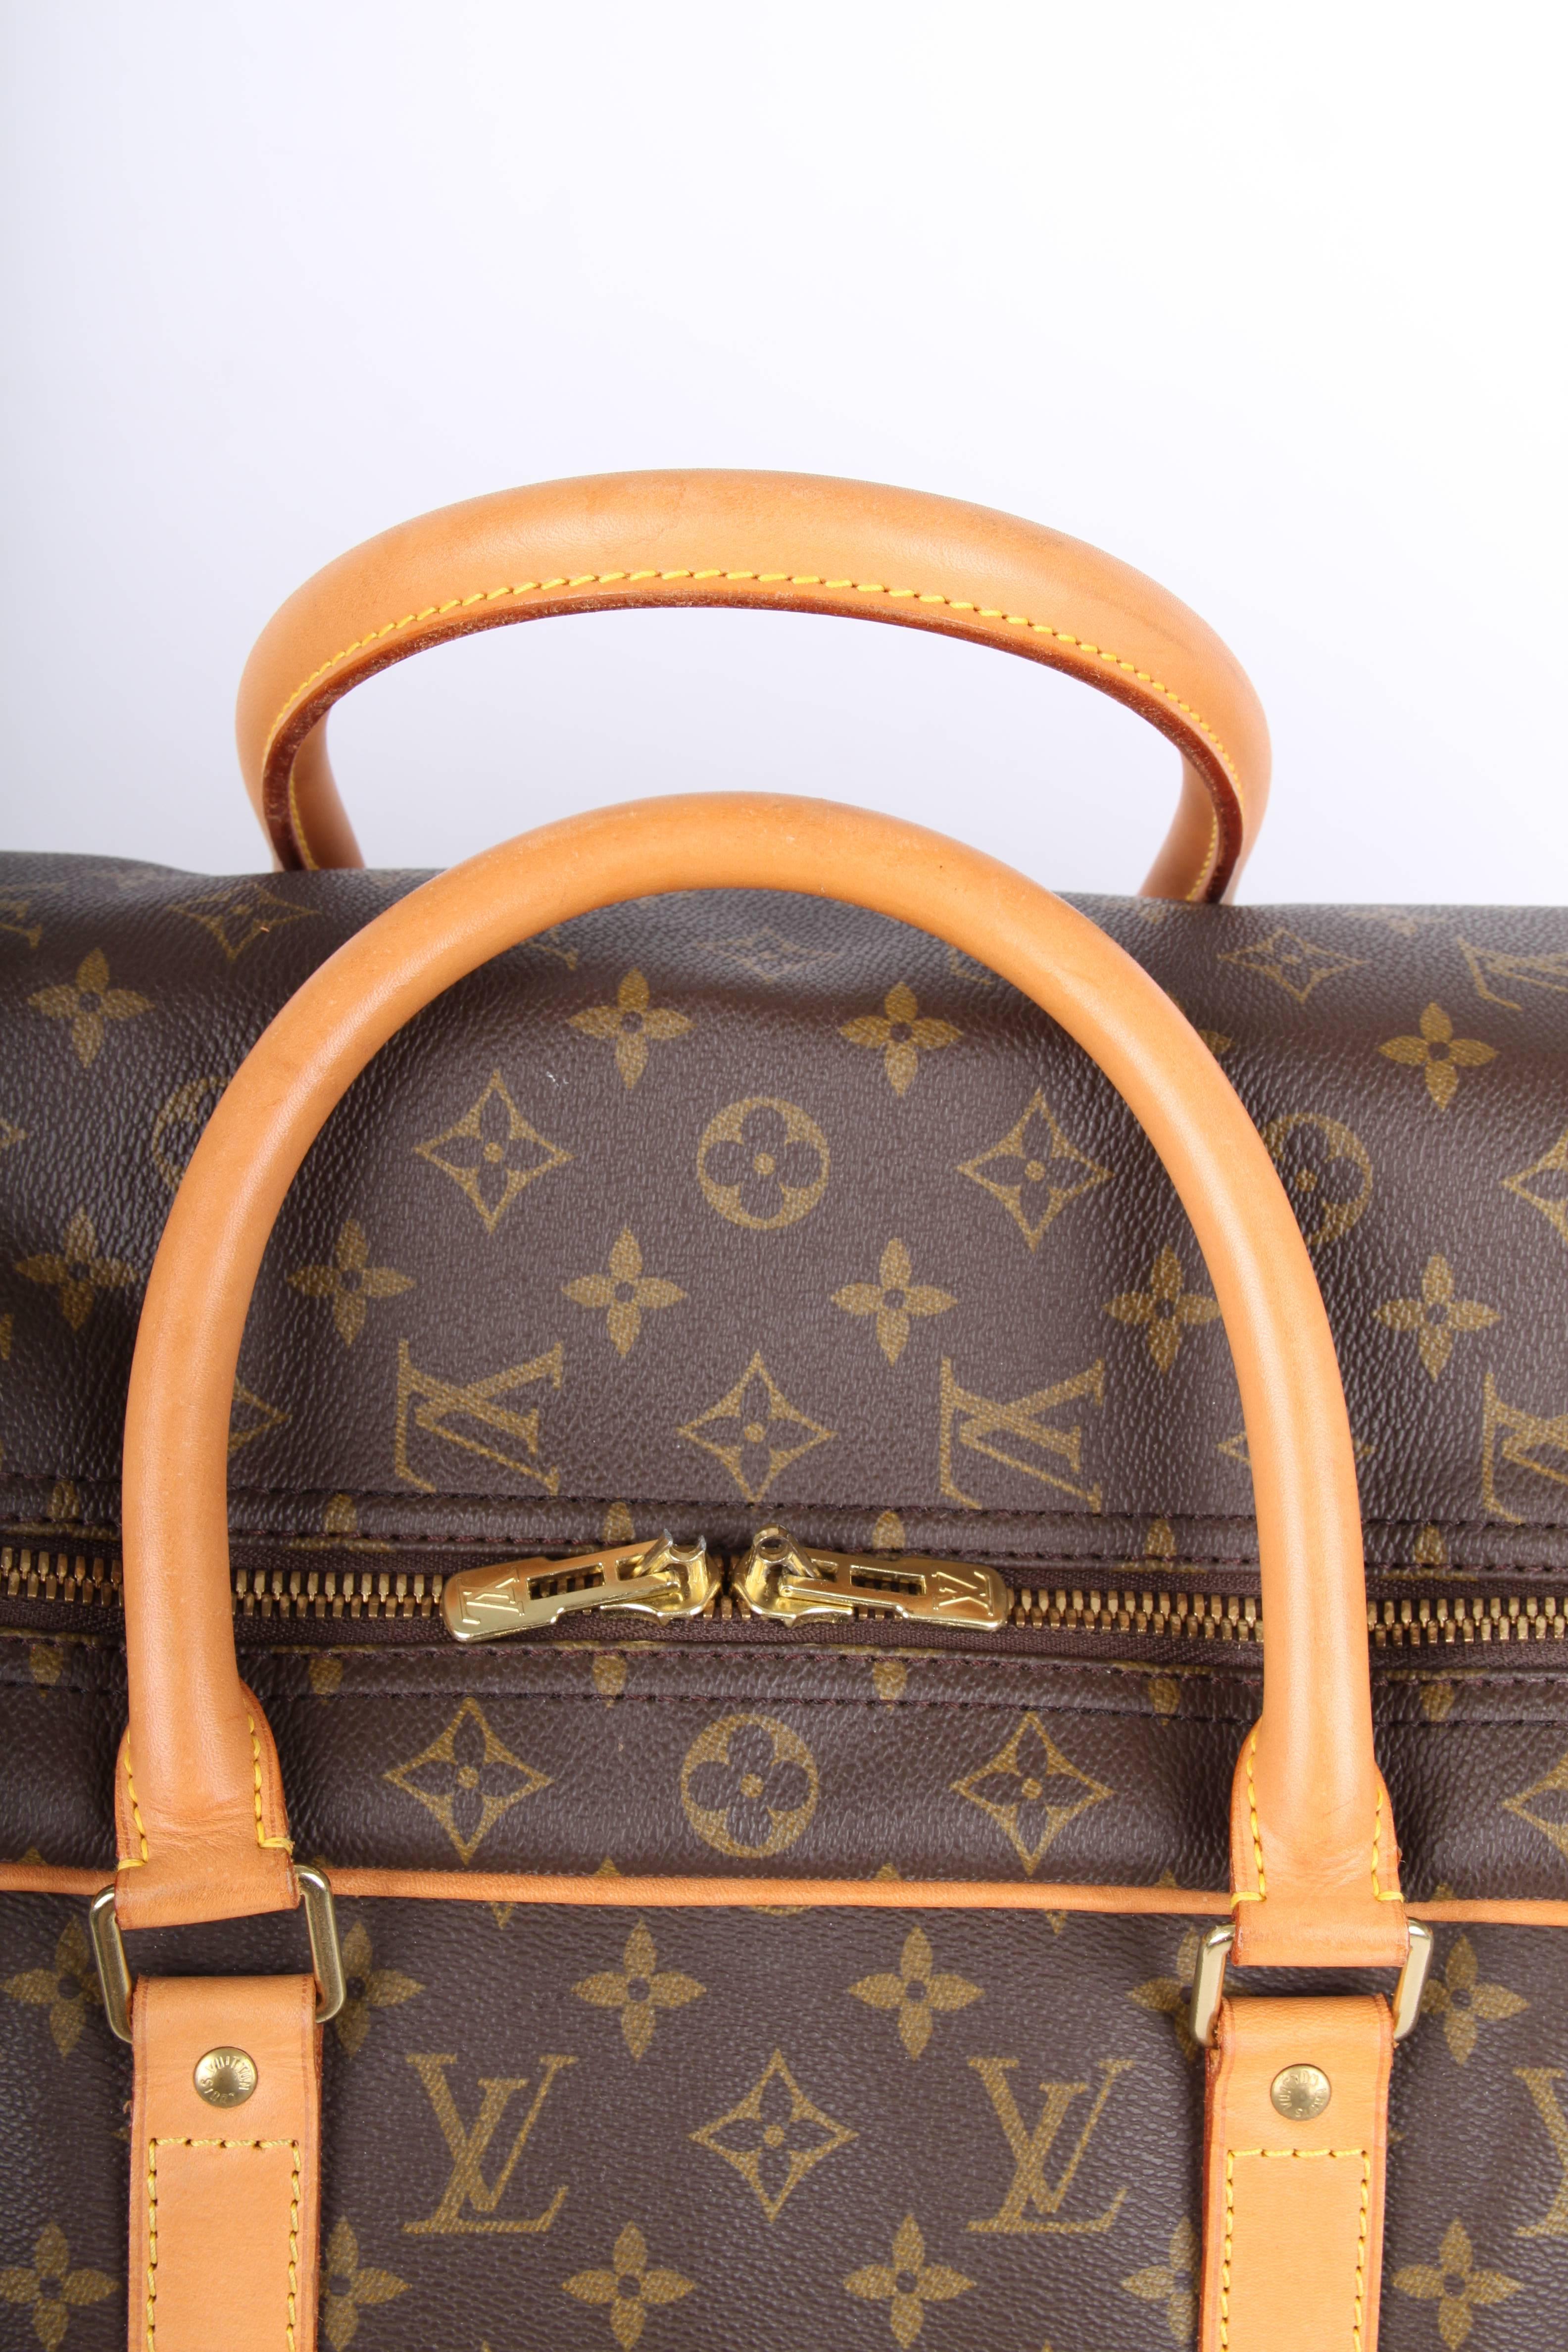 Holidays? This beautiful Louis Vuitton suitcase loves to travel with you!

The second largest of the Sirius suitcases closes with a double zipper. It is easy to carry with its comfortable rounded handles and is of course made of darkbrown canvas